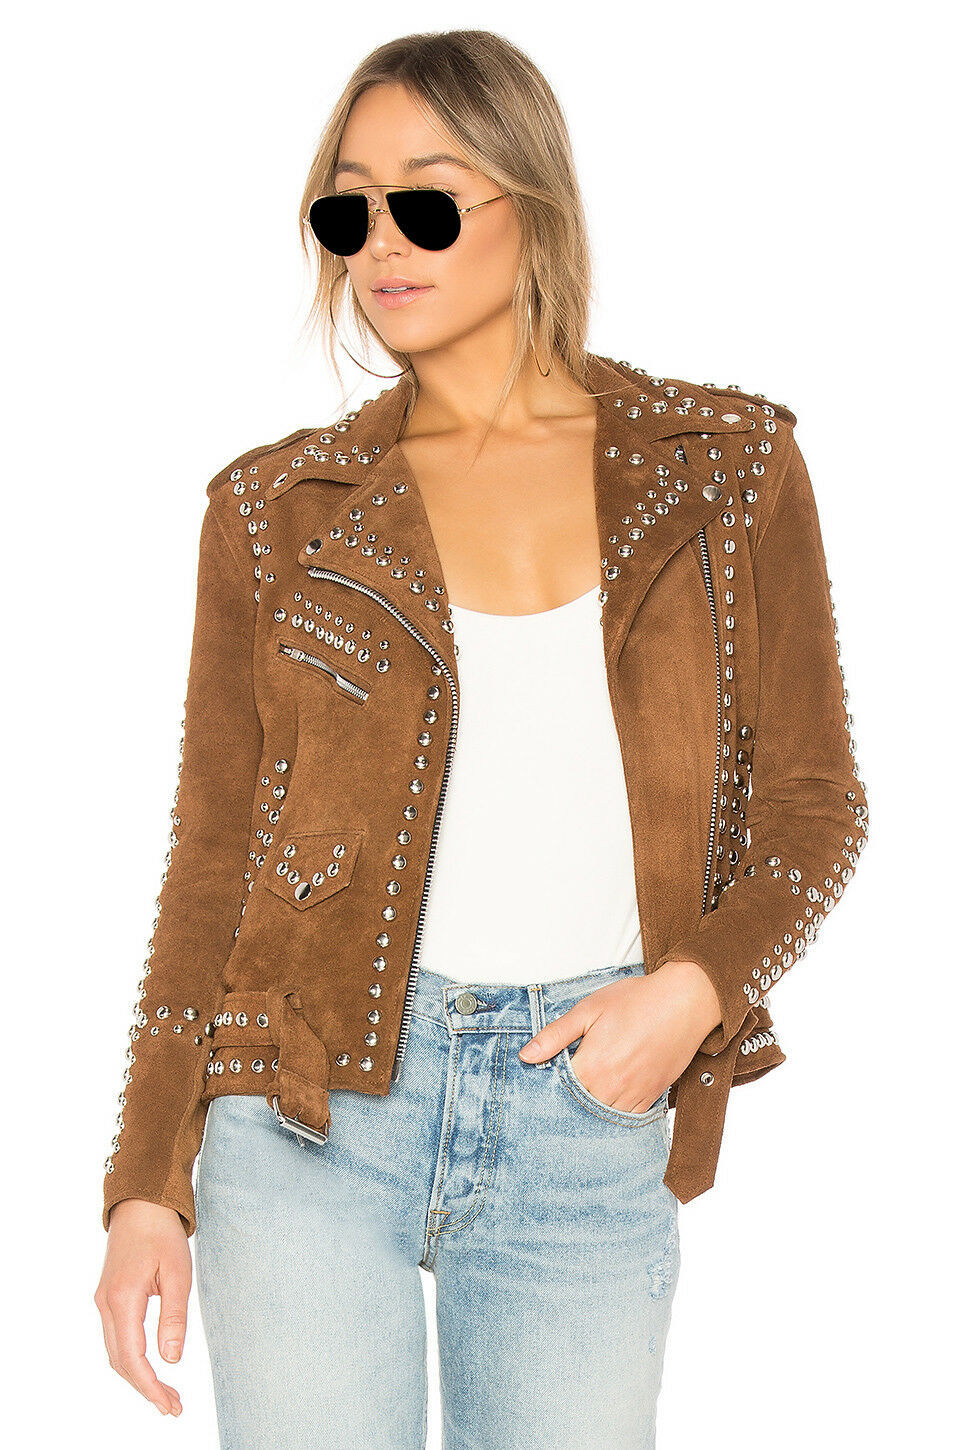 Women's Brown Color Genuine Suede Leather Silver Studded Belted Straps Jacket